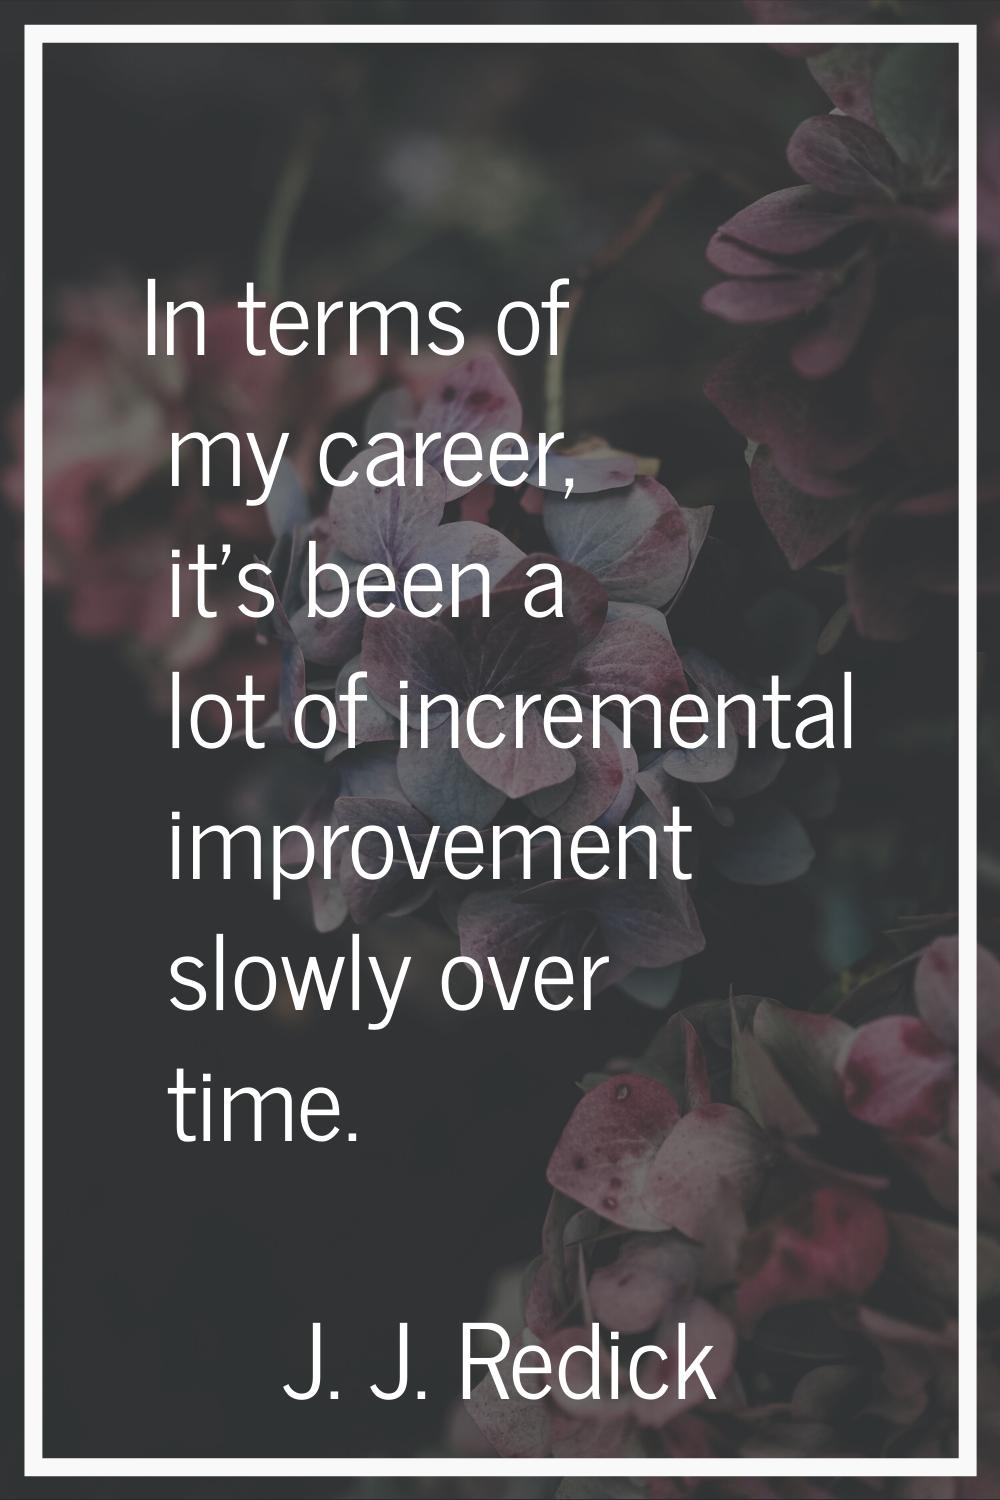 In terms of my career, it's been a lot of incremental improvement slowly over time.